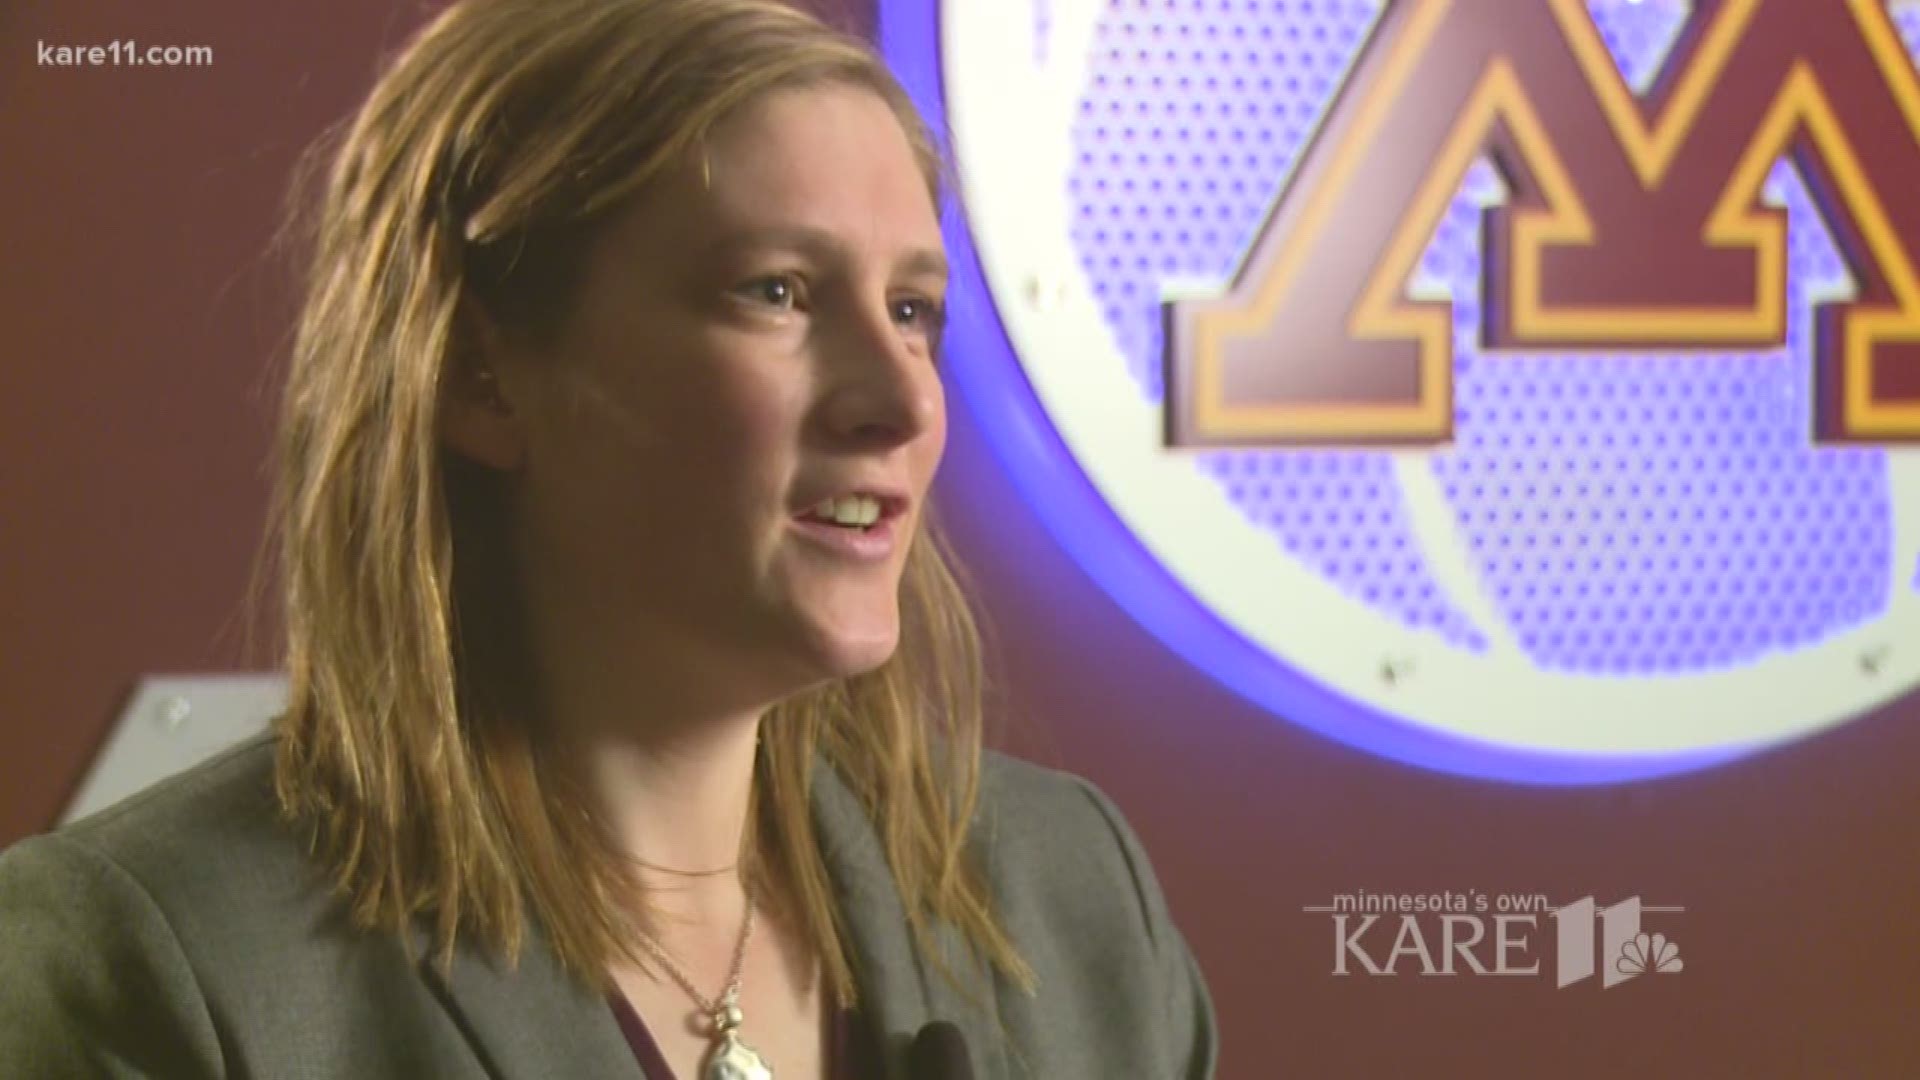 One of the most decorated players in women's basketball history is coming home. https://kare11.tv/2qvmrBb